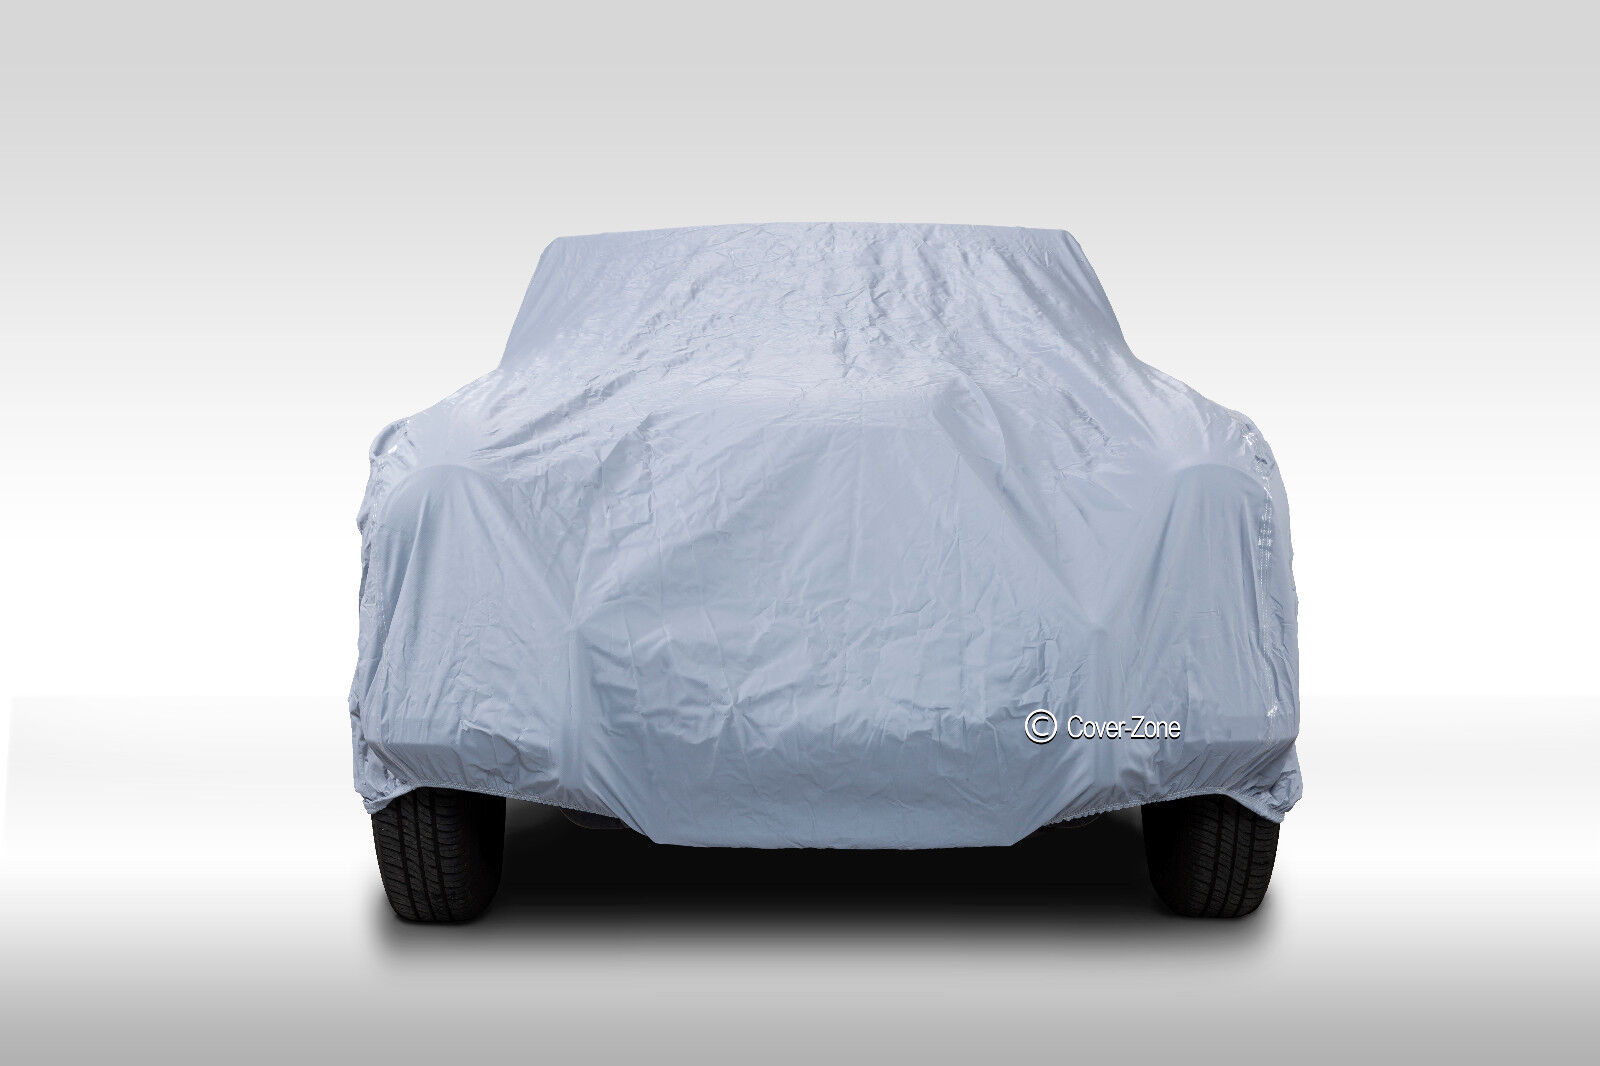 Monsoon Whole Garage, Car Cover for Mercedes Benz 220,230, S, E (W111Fintail)